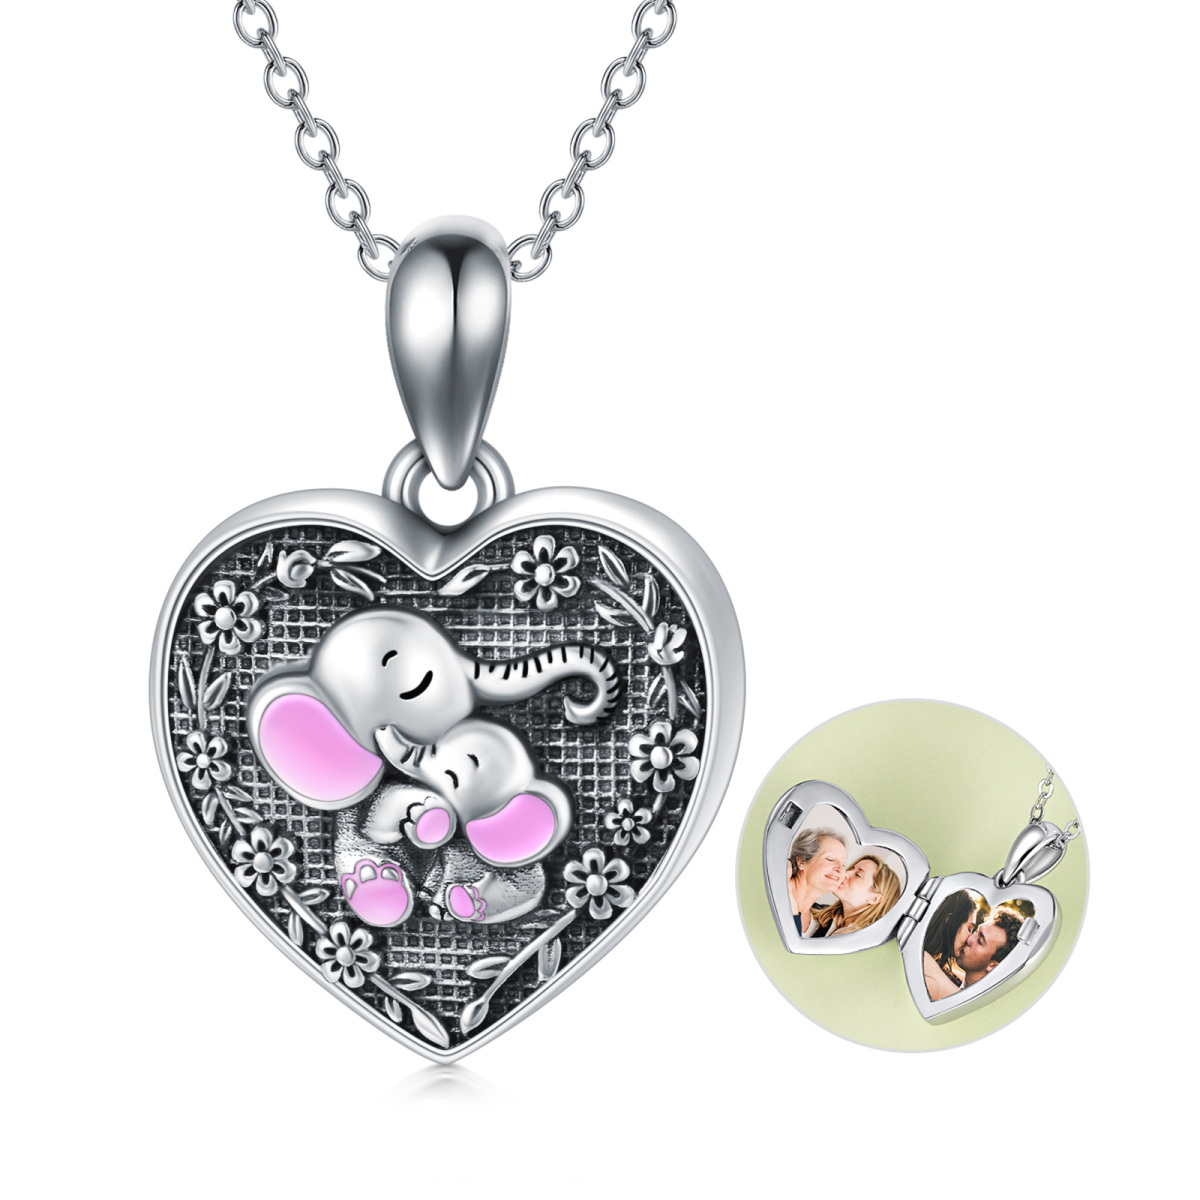 Sterling Silver Personalized Photo & Heart Personalized Photo Locket Necklace with Engraved Word-1